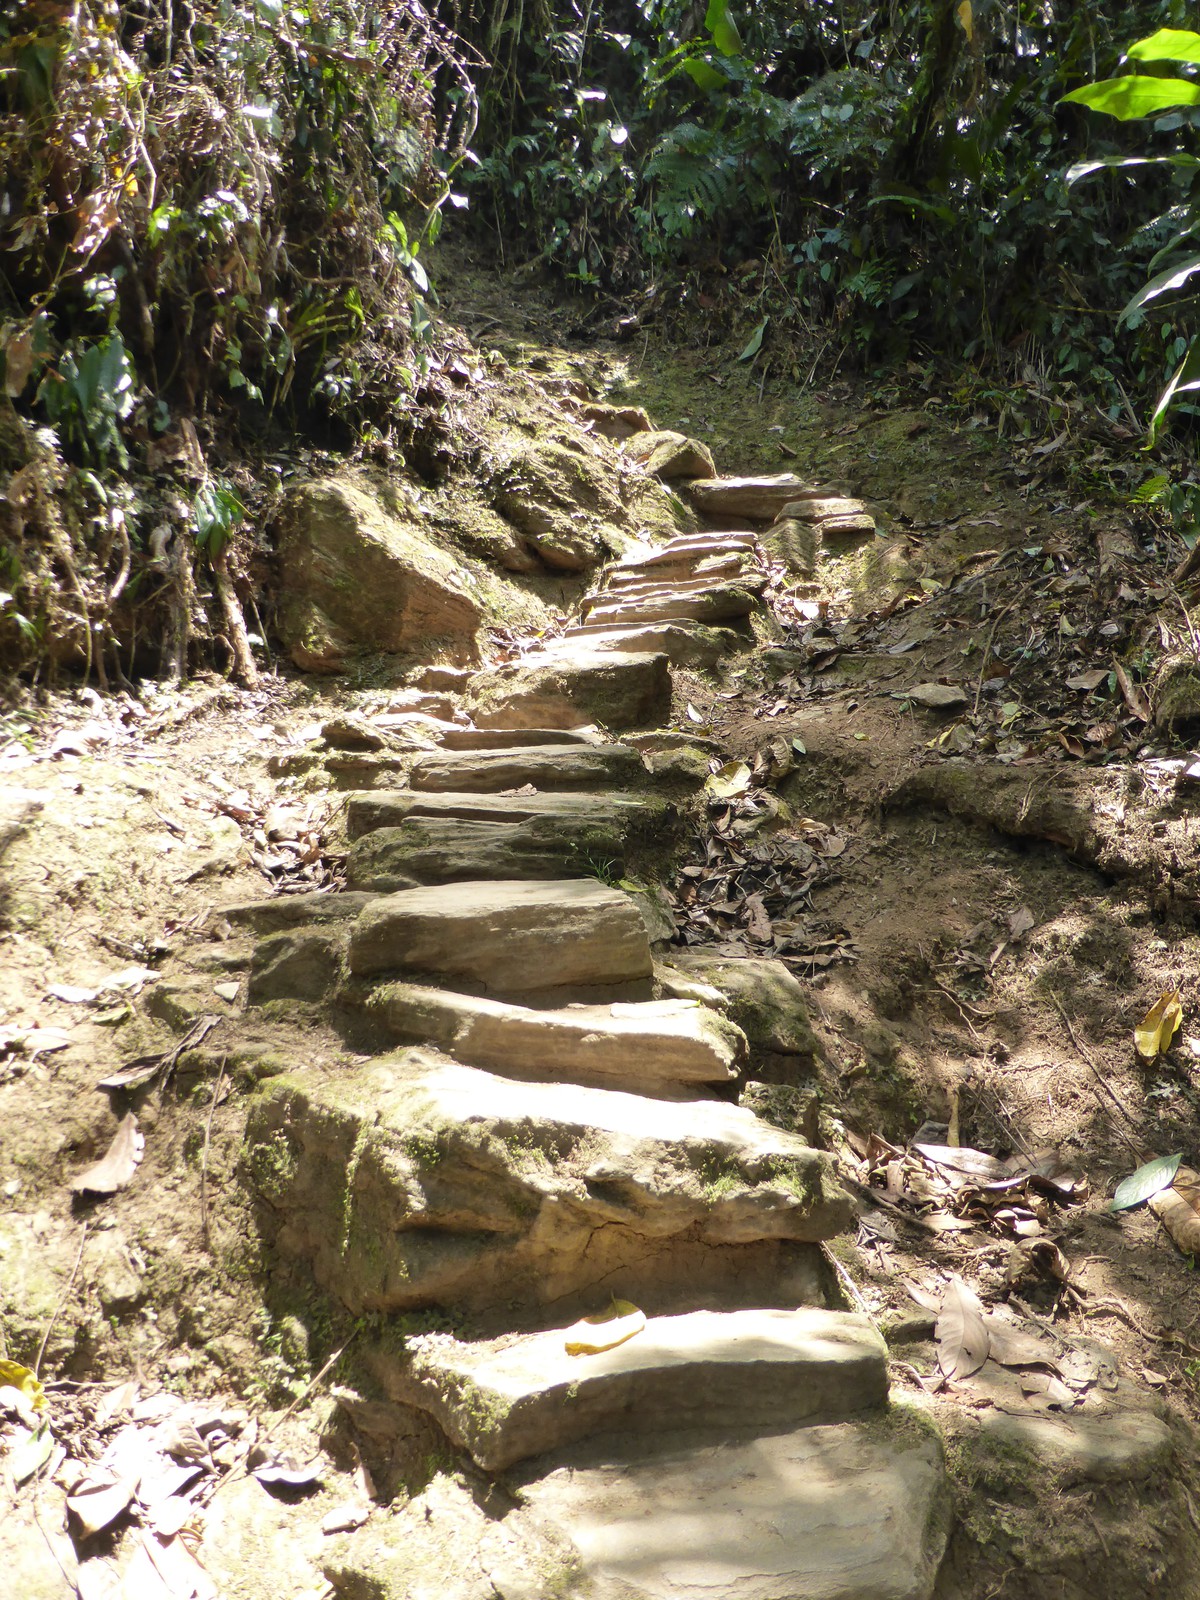 Final access to the Lost City is up a steep stone staircase with 1200 steps